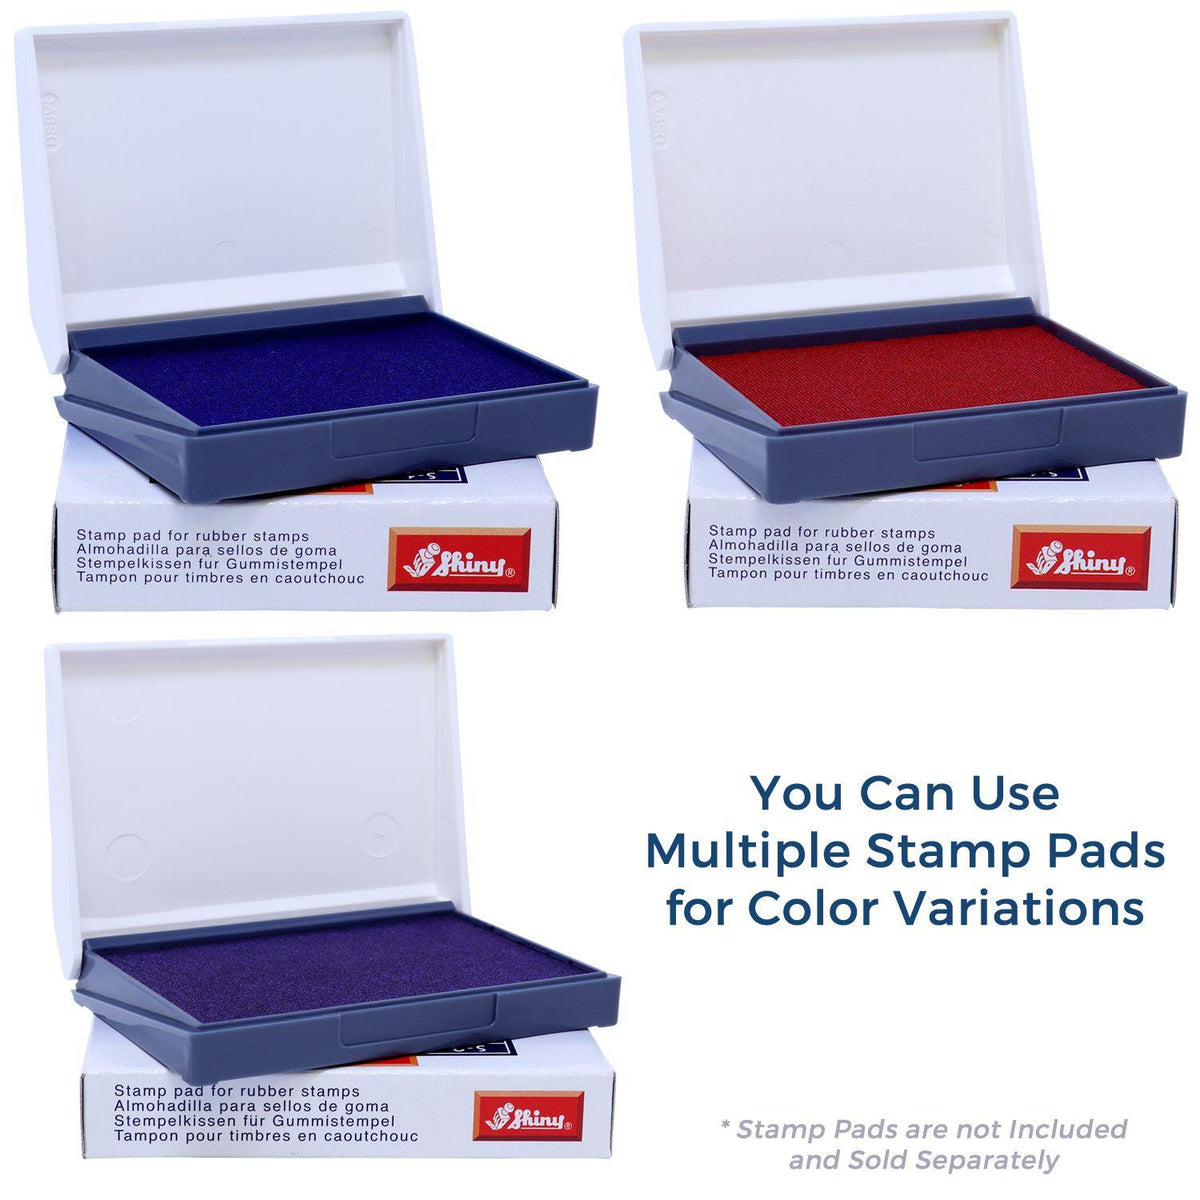 Stamp Pads for Large No Negociable Rubber Stamp Available